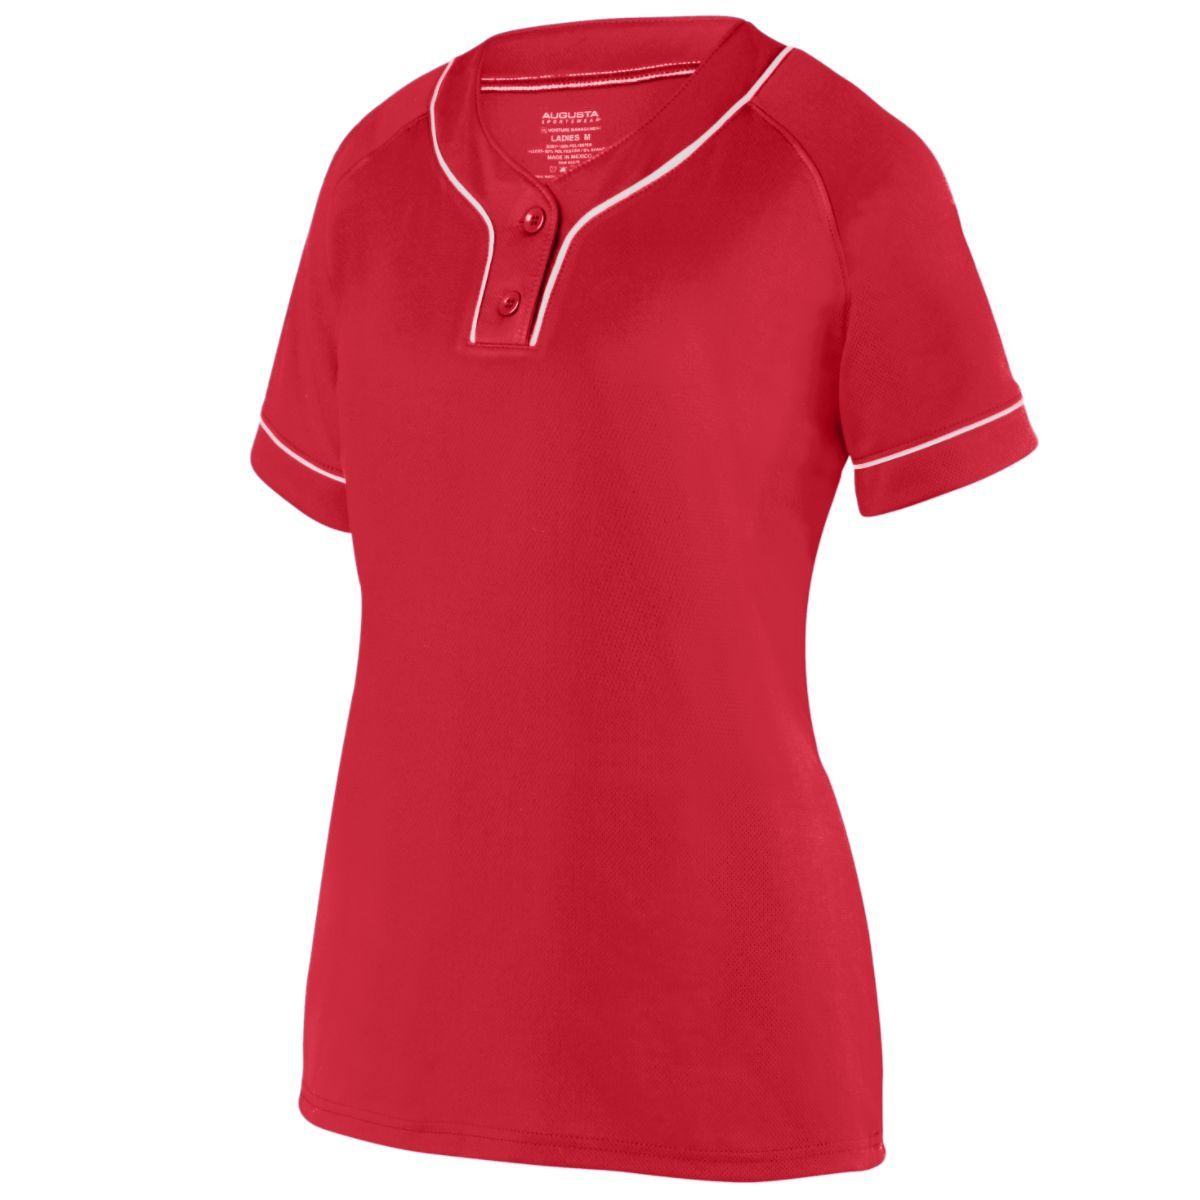 Augusta Sportswear Girls Overpower Two-Button Jersey in Red/White  -Part of the Girls, Augusta-Products, Softball, Girls-Jersey, Shirts product lines at KanaleyCreations.com